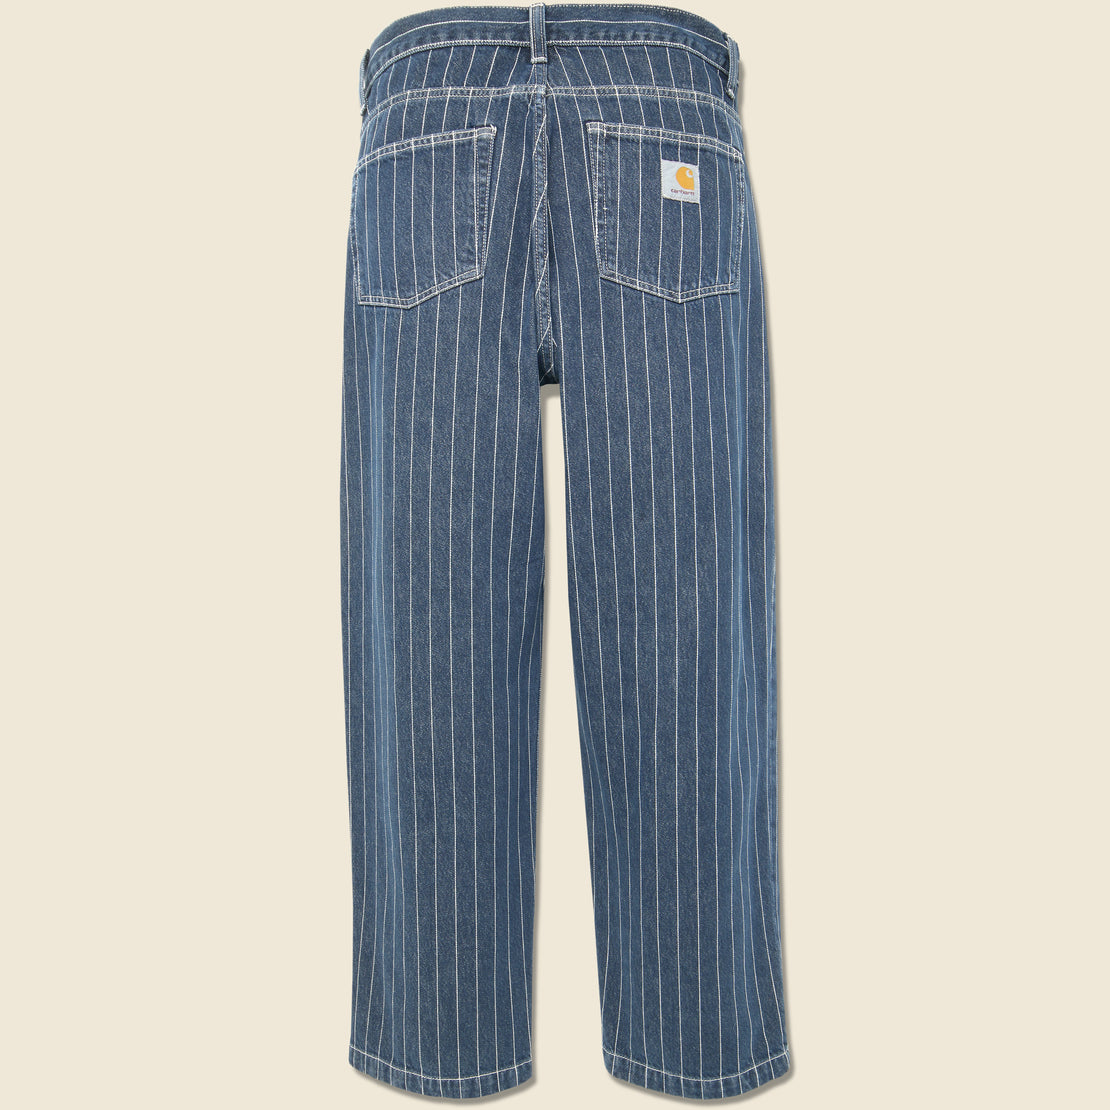 Orlean Pant - Blue/White Orlean Stripe - Carhartt WIP - STAG Provisions - Pants - Twill